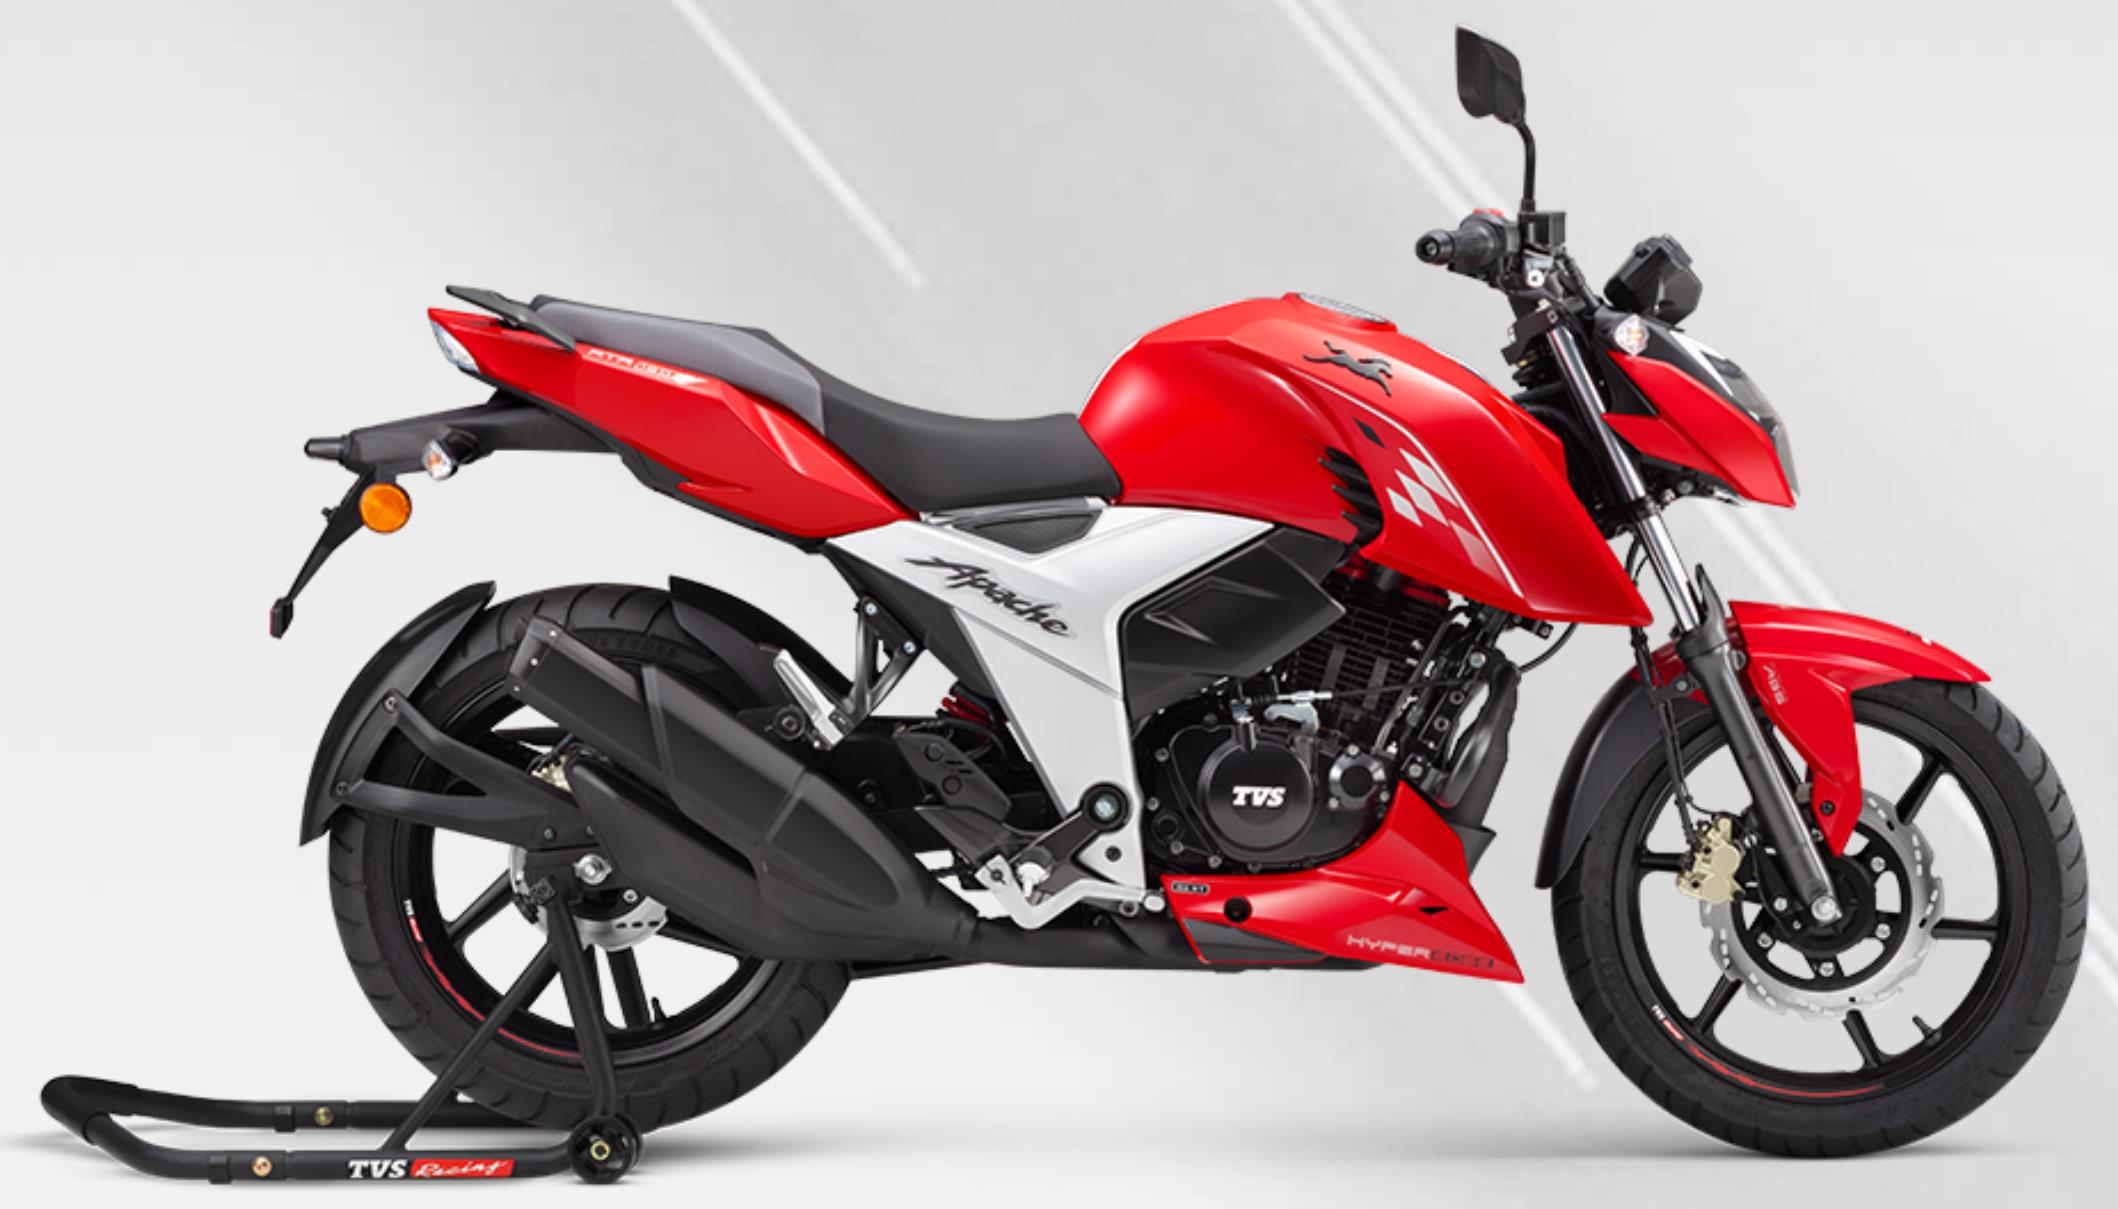 22 Tvs Apache Rtr 160 4v Price Specs Top Speed Mileage In India